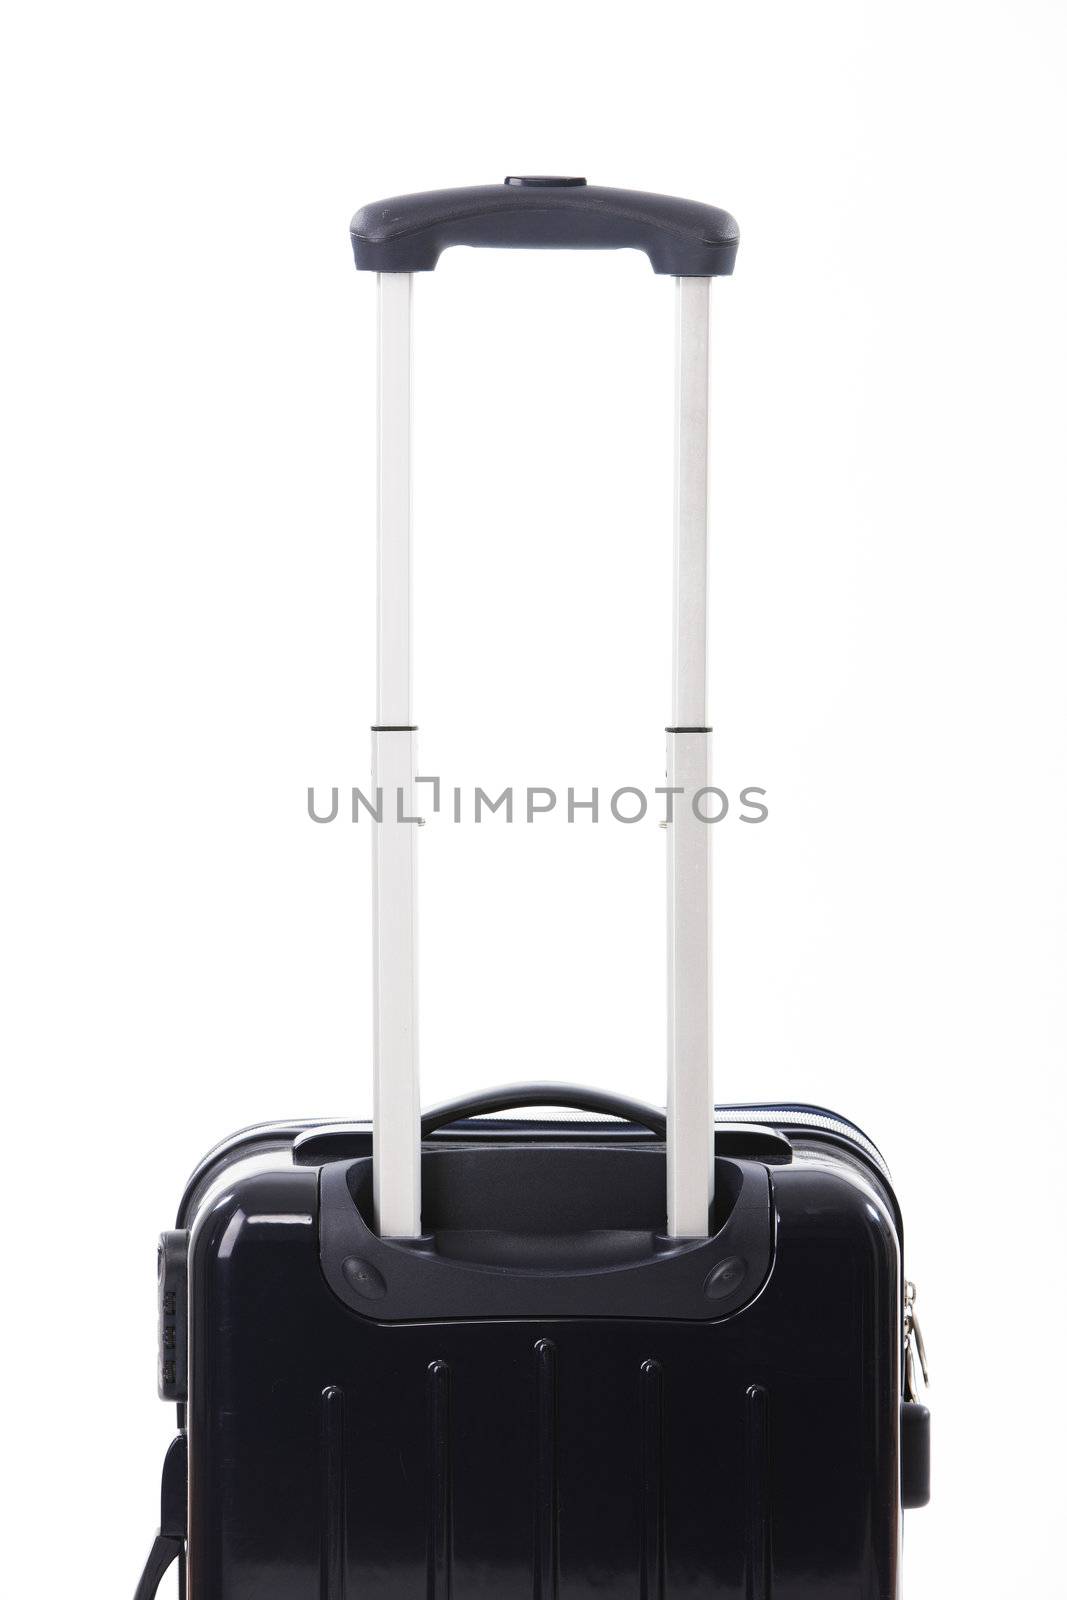  rolling suitcase close up on white background